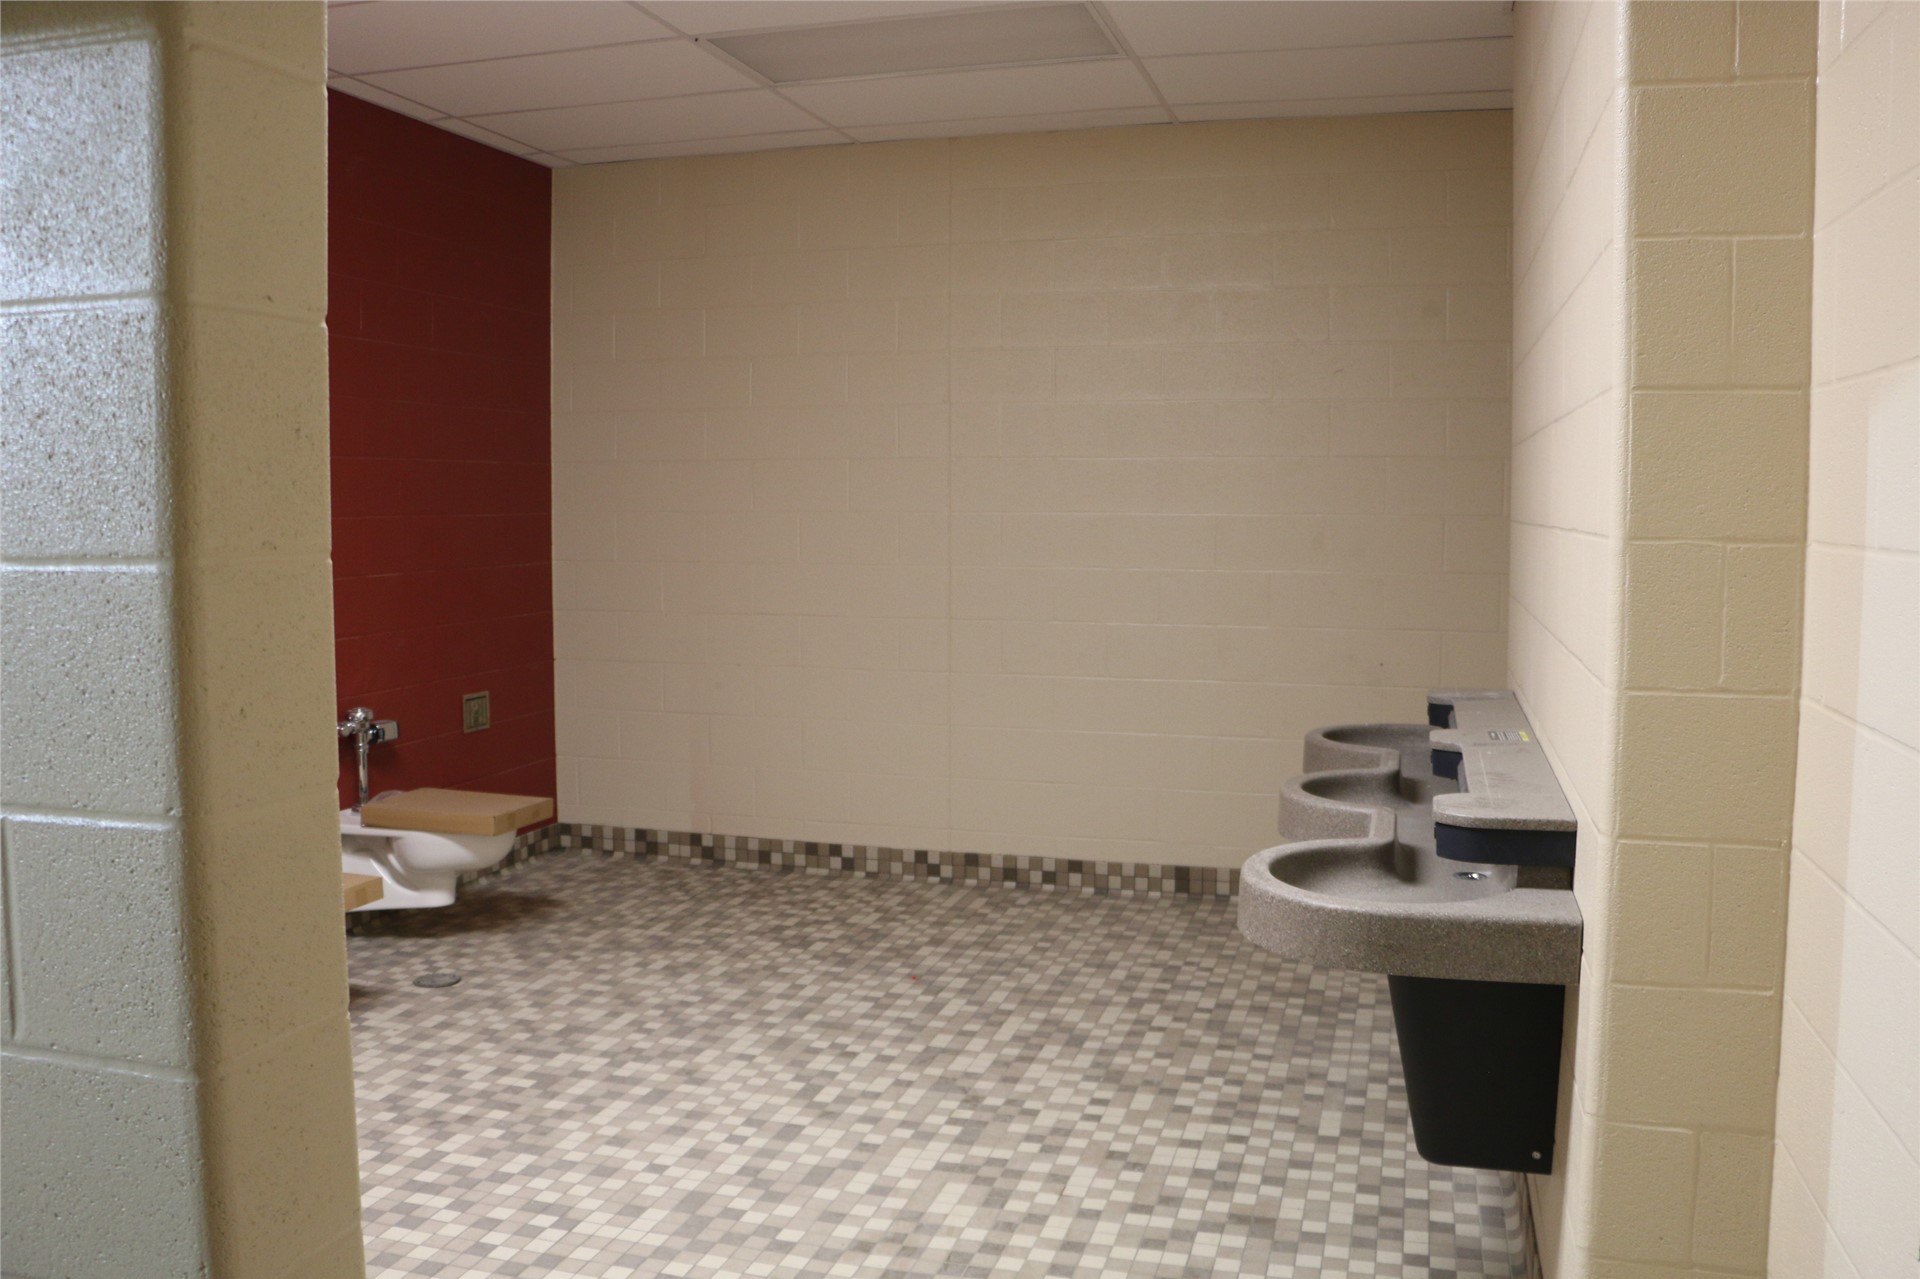 Boys' Restroom on the 2nd floor of the Academic Wing